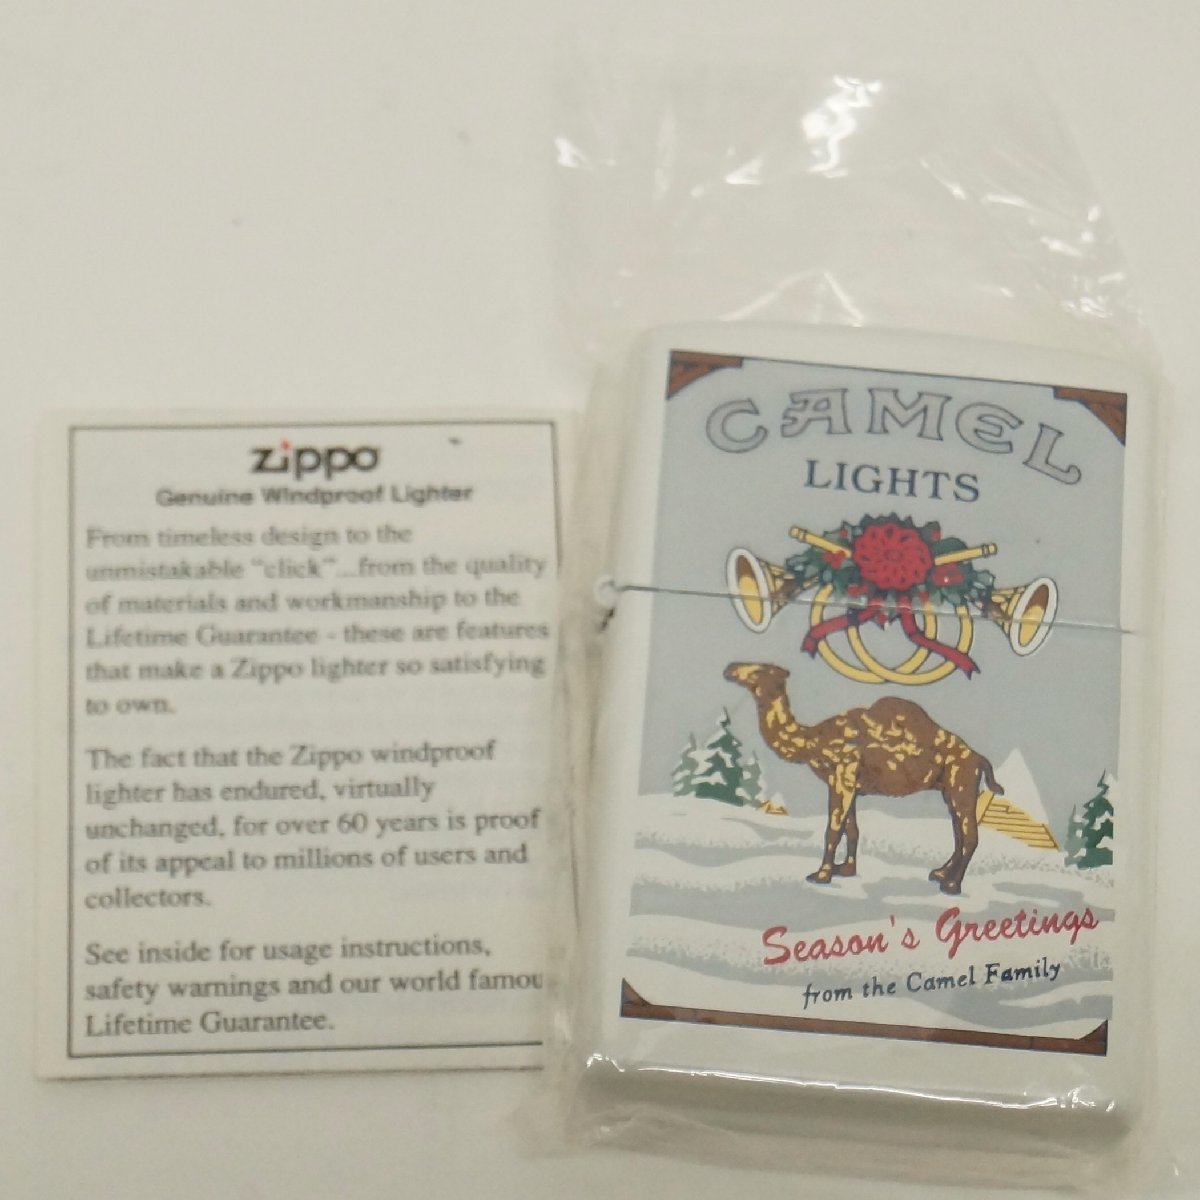 Ｚippo CAMEL LIGHTS Season’s Greetings from the Camel Family 1994年製 ジッポライター 着火未確認 小キズあり